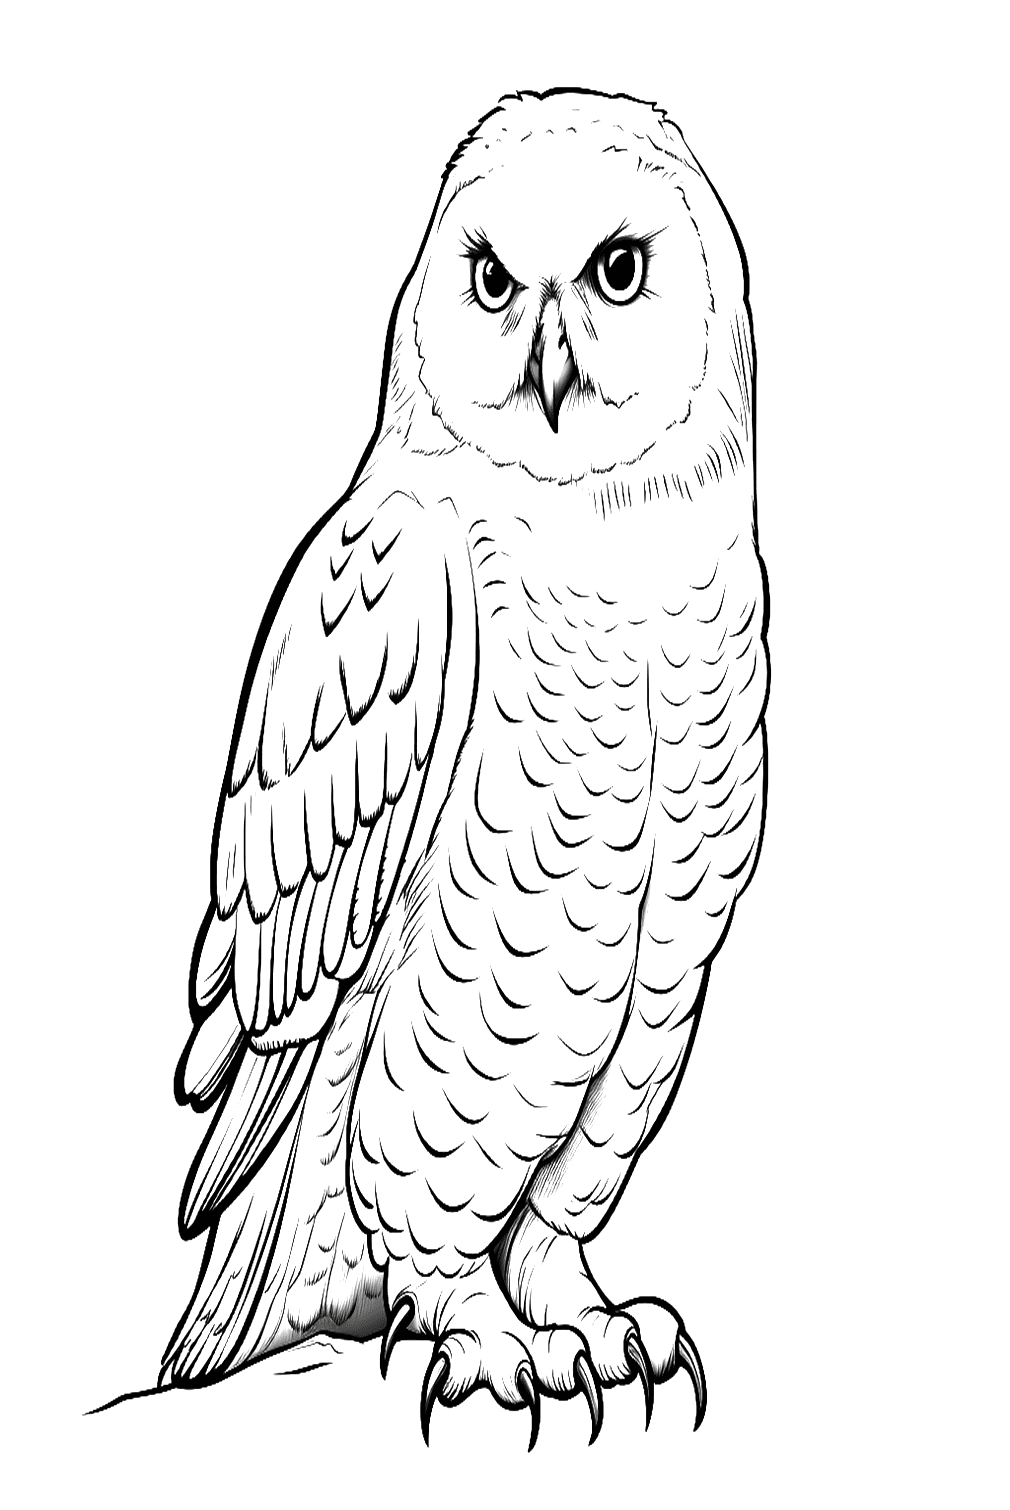 Realistic Owl Coloring Page